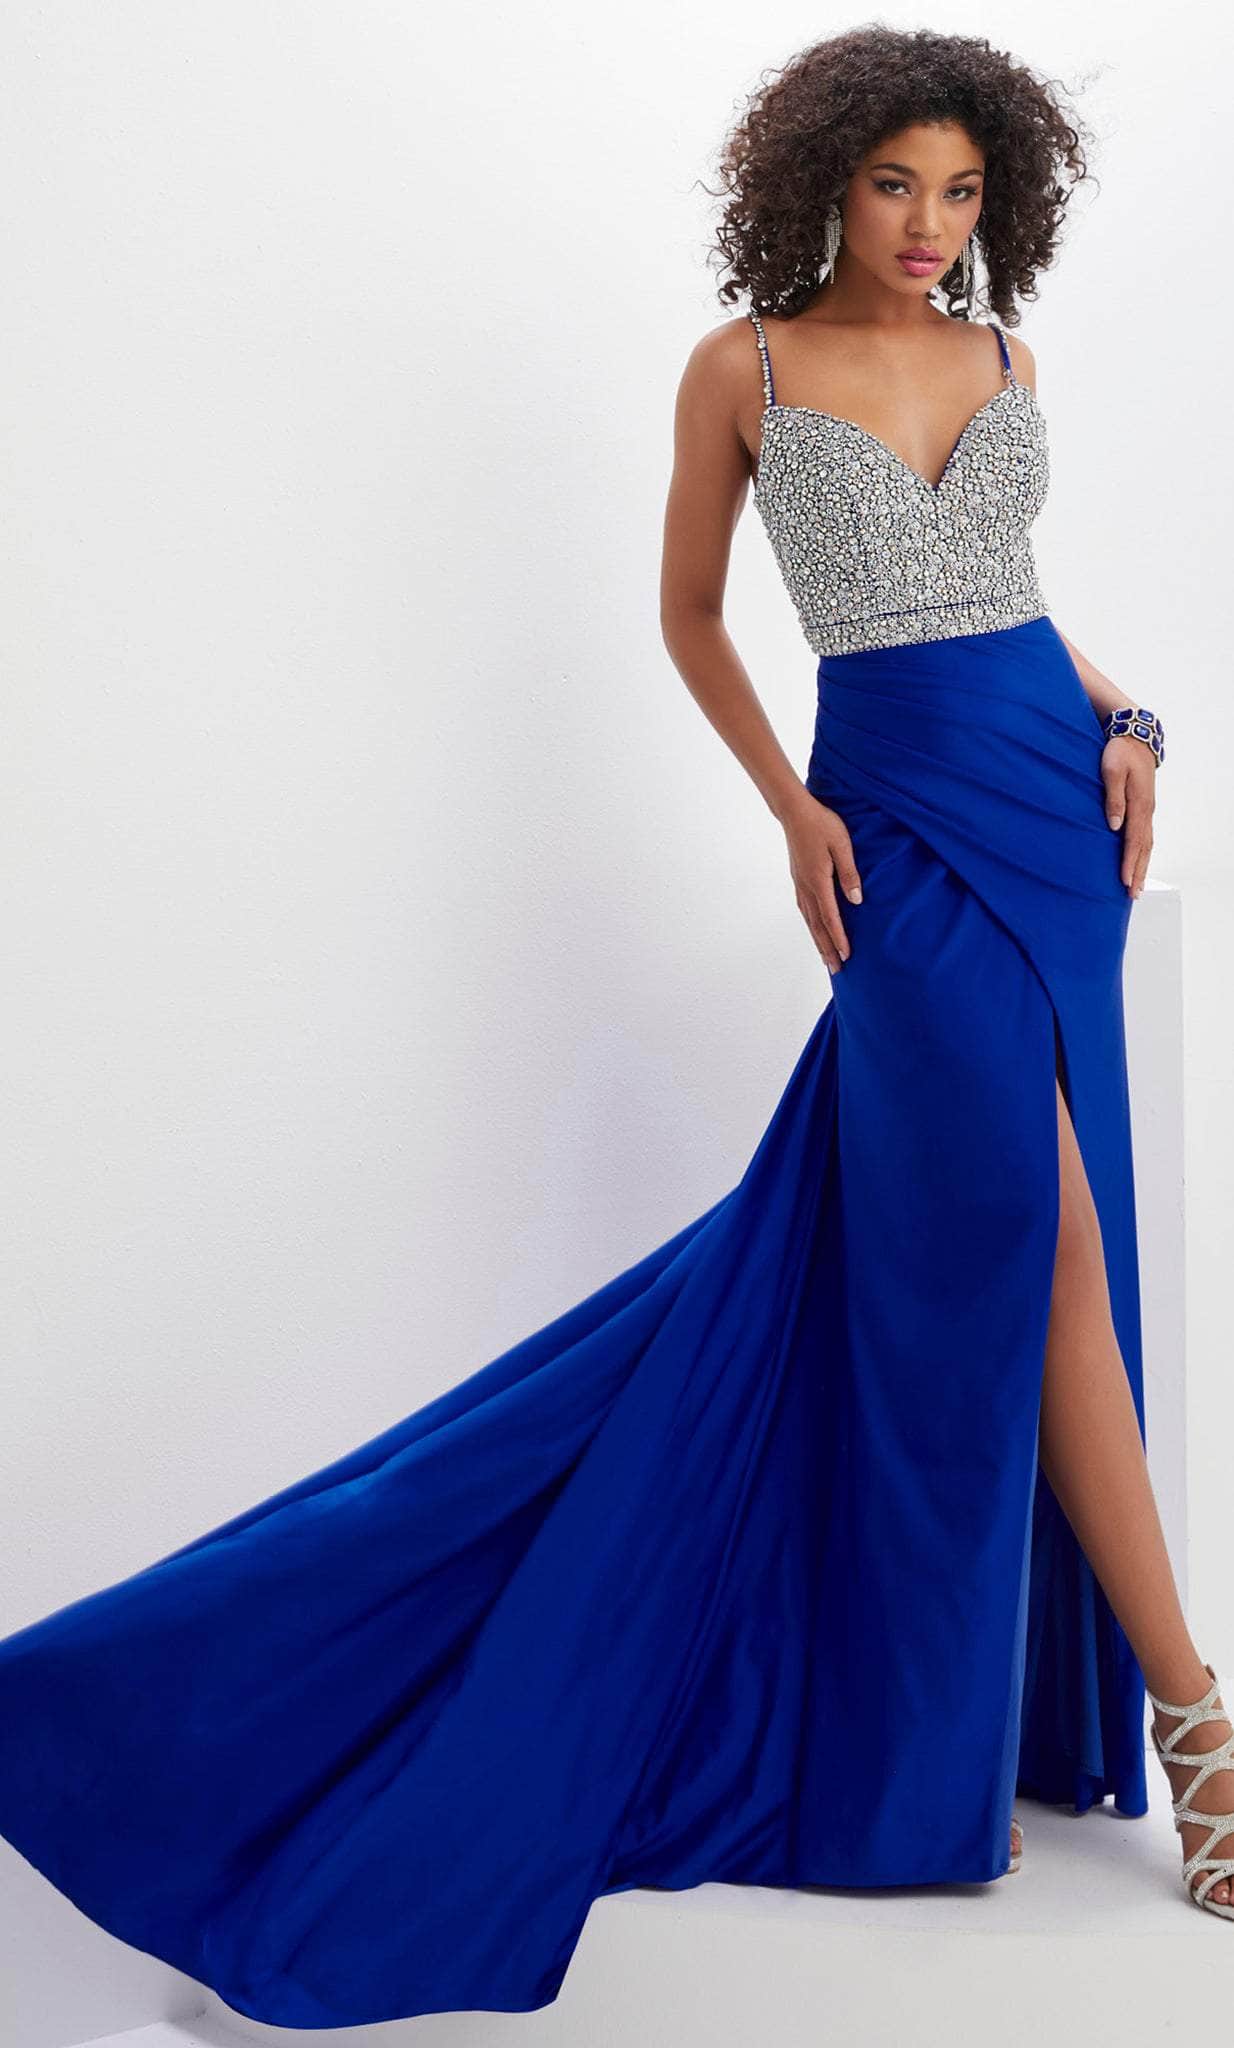 Image of Panoply 14131 - Jeweled Bodice Trumpet Evening Gown